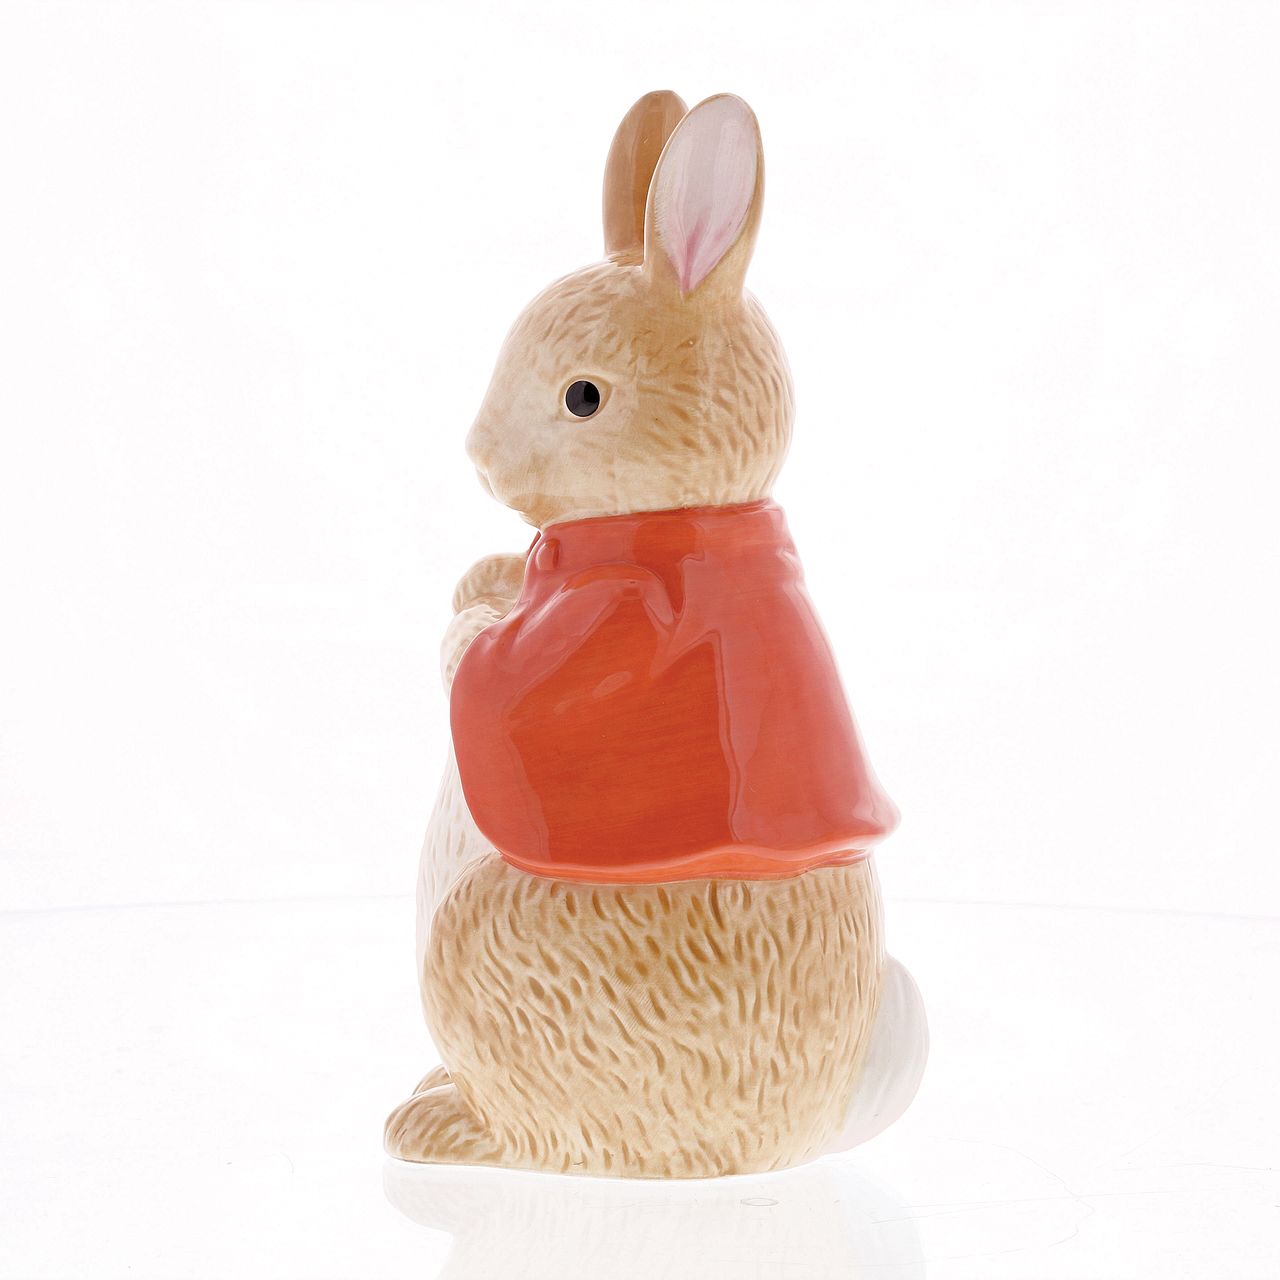 Beatrix Potter Flopsy Sculpted Money Bank  This delightful and charming Flopsy shaped money box would make an ideal christening gift, for collectors and Peter Rabbit fans, both young and old. The artwork is taken from the original illustrations from the Beatrix Potter stories.